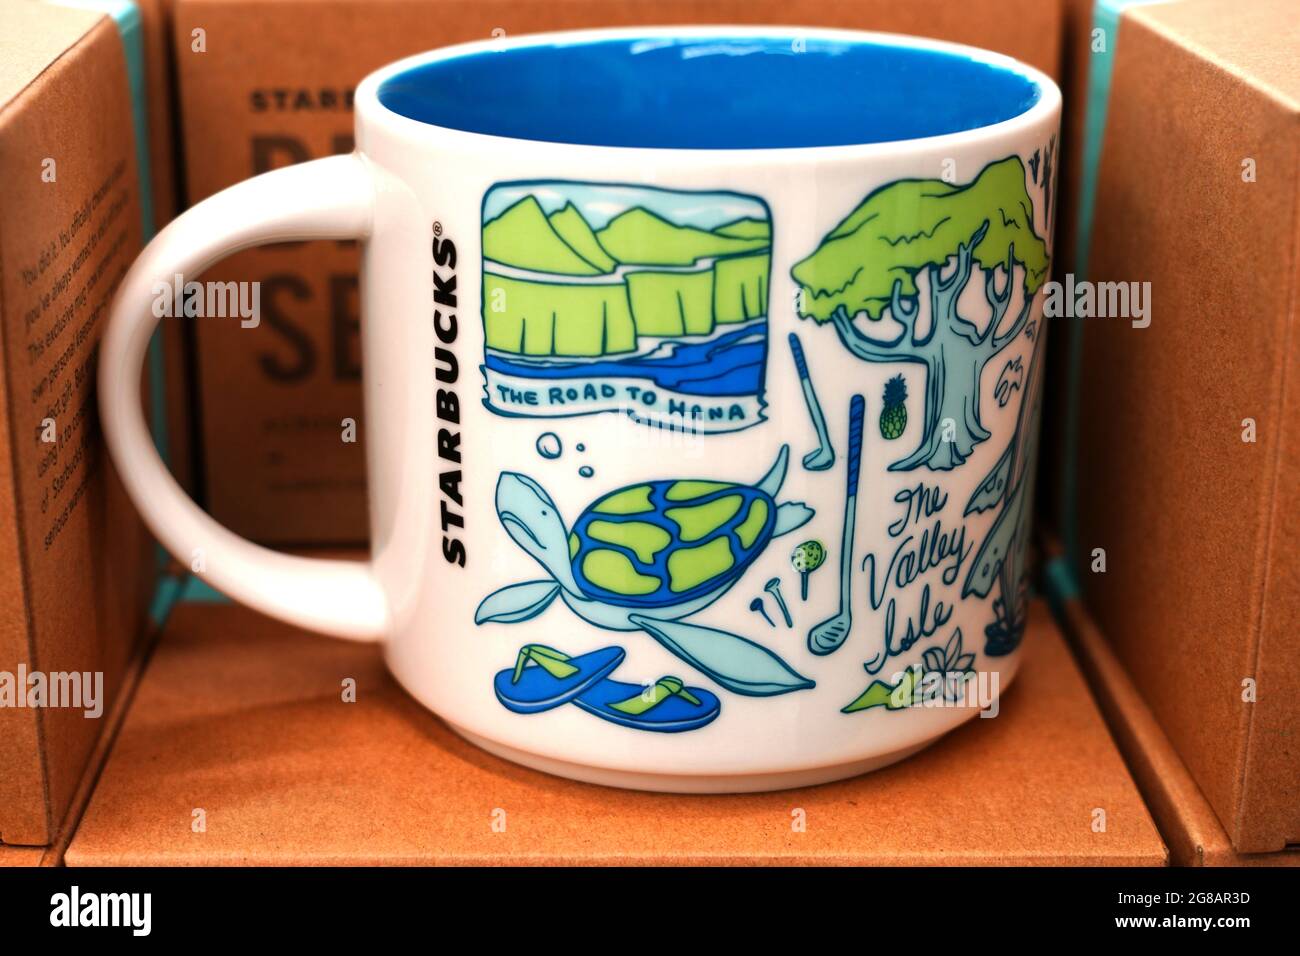 https://c8.alamy.com/comp/2G8AR3D/kahului-hi-27-may-2021-view-of-a-starbucks-been-there-mug-representing-maui-hawaii-for-sale-as-collectible-souvenirs-in-a-starbucks-coffee-shop-2G8AR3D.jpg